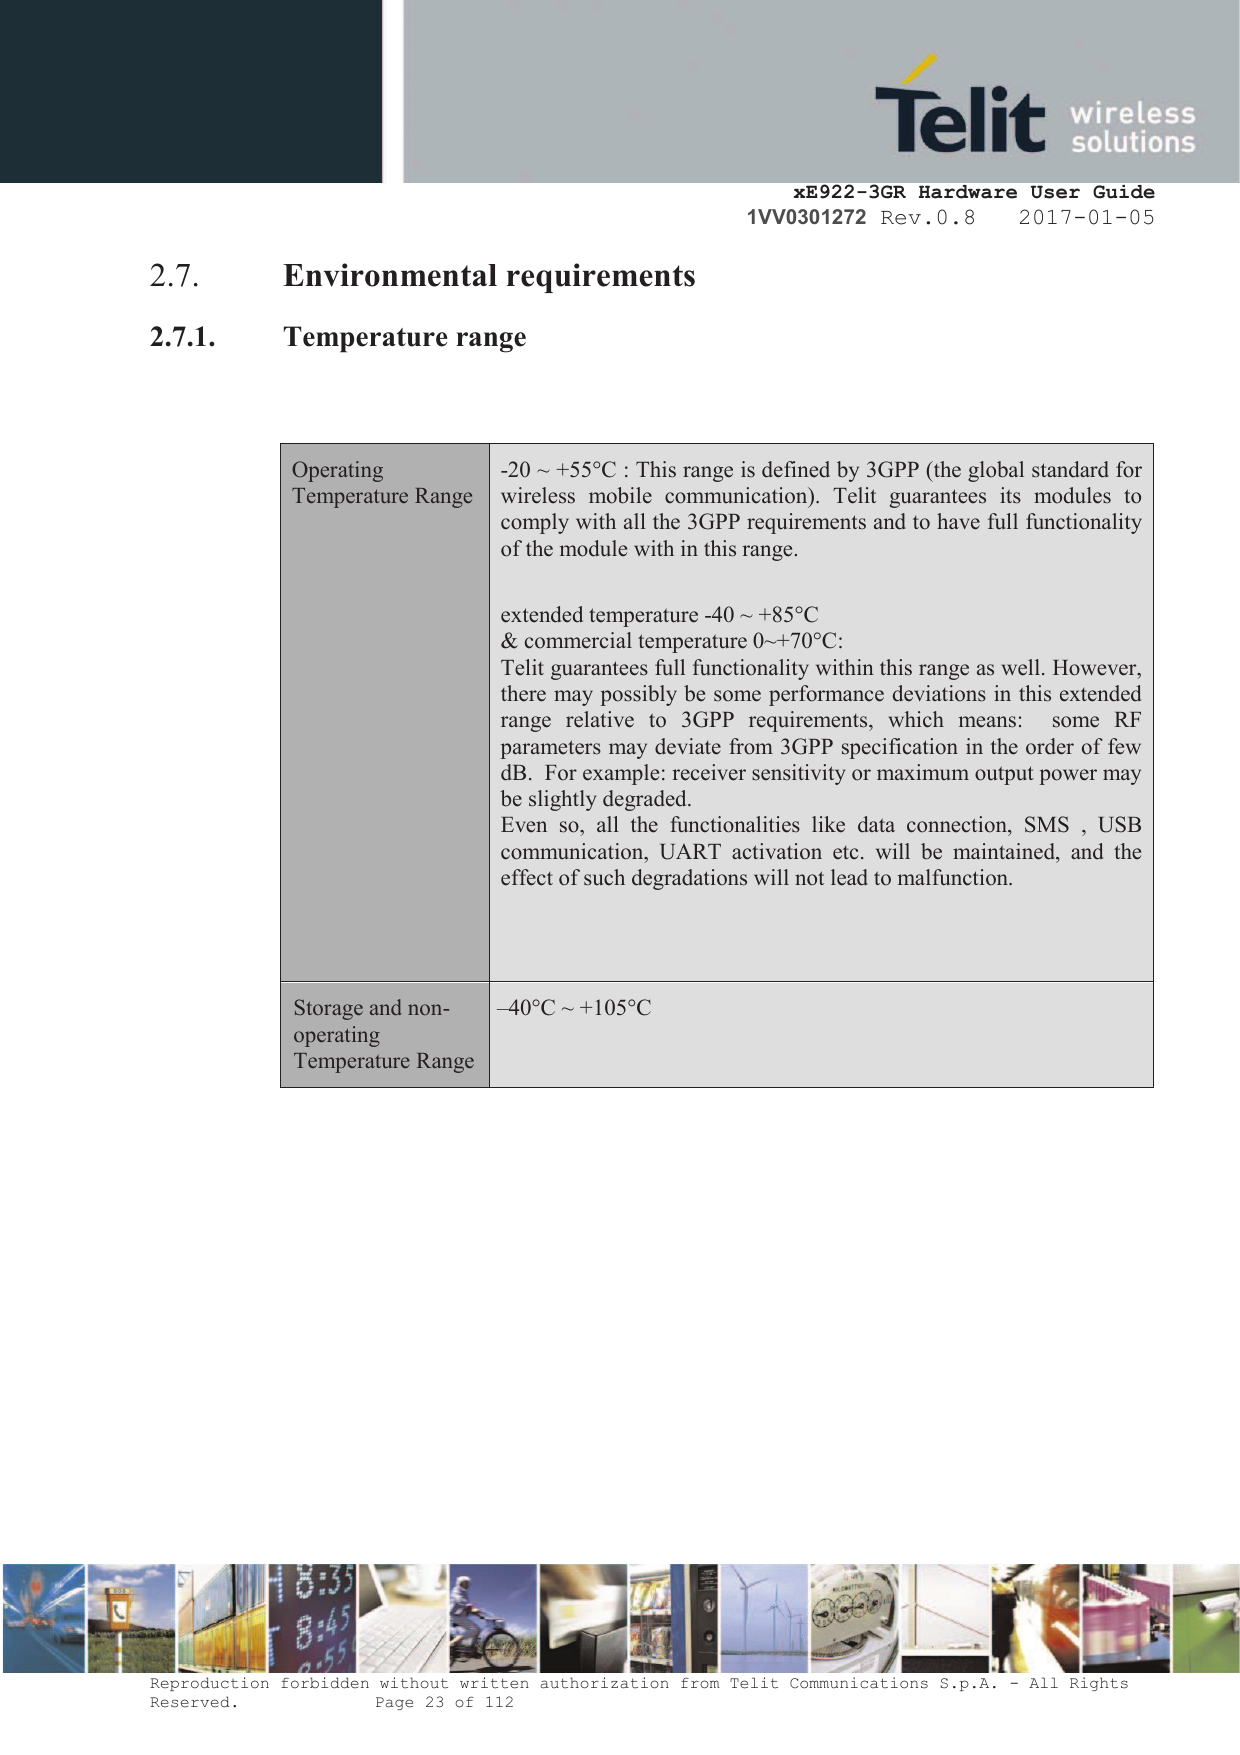     xE922-3GR Hardware User Guide 1VV0301272 Rev.0.8   2017-01-05 Reproduction forbidden without written authorization from Telit Communications S.p.A. - All Rights Reserved.    Page 23 of 112  2.7. Environmental requirements 2.7.1. Temperature range   Operating Temperature Range -20 ~ +55°C : This range is defined by 3GPP (the global standard for wireless  mobile  communication).  Telit  guarantees  its  modules  to comply with all the 3GPP requirements and to have full functionality of the module with in this range.  extended temperature -40 ~ +85°C  &amp; commercial temperature 0~+70°C: Telit guarantees full functionality within this range as well. However, there may possibly be some performance deviations in this extended range  relative  to 3GPP  requirements, which  means:    some  RF parameters may deviate from 3GPP specification in the order of few dB.  For example: receiver sensitivity or maximum output power may be slightly degraded.  Even  so,  all  the  functionalities  like data  connection,  SMS ,  USB communication,  UART  activation  etc.  will  be  maintained,  and  the effect of such degradations will not lead to malfunction.   Storage and non-operating Temperature Range  –40°C ~ +105°C      